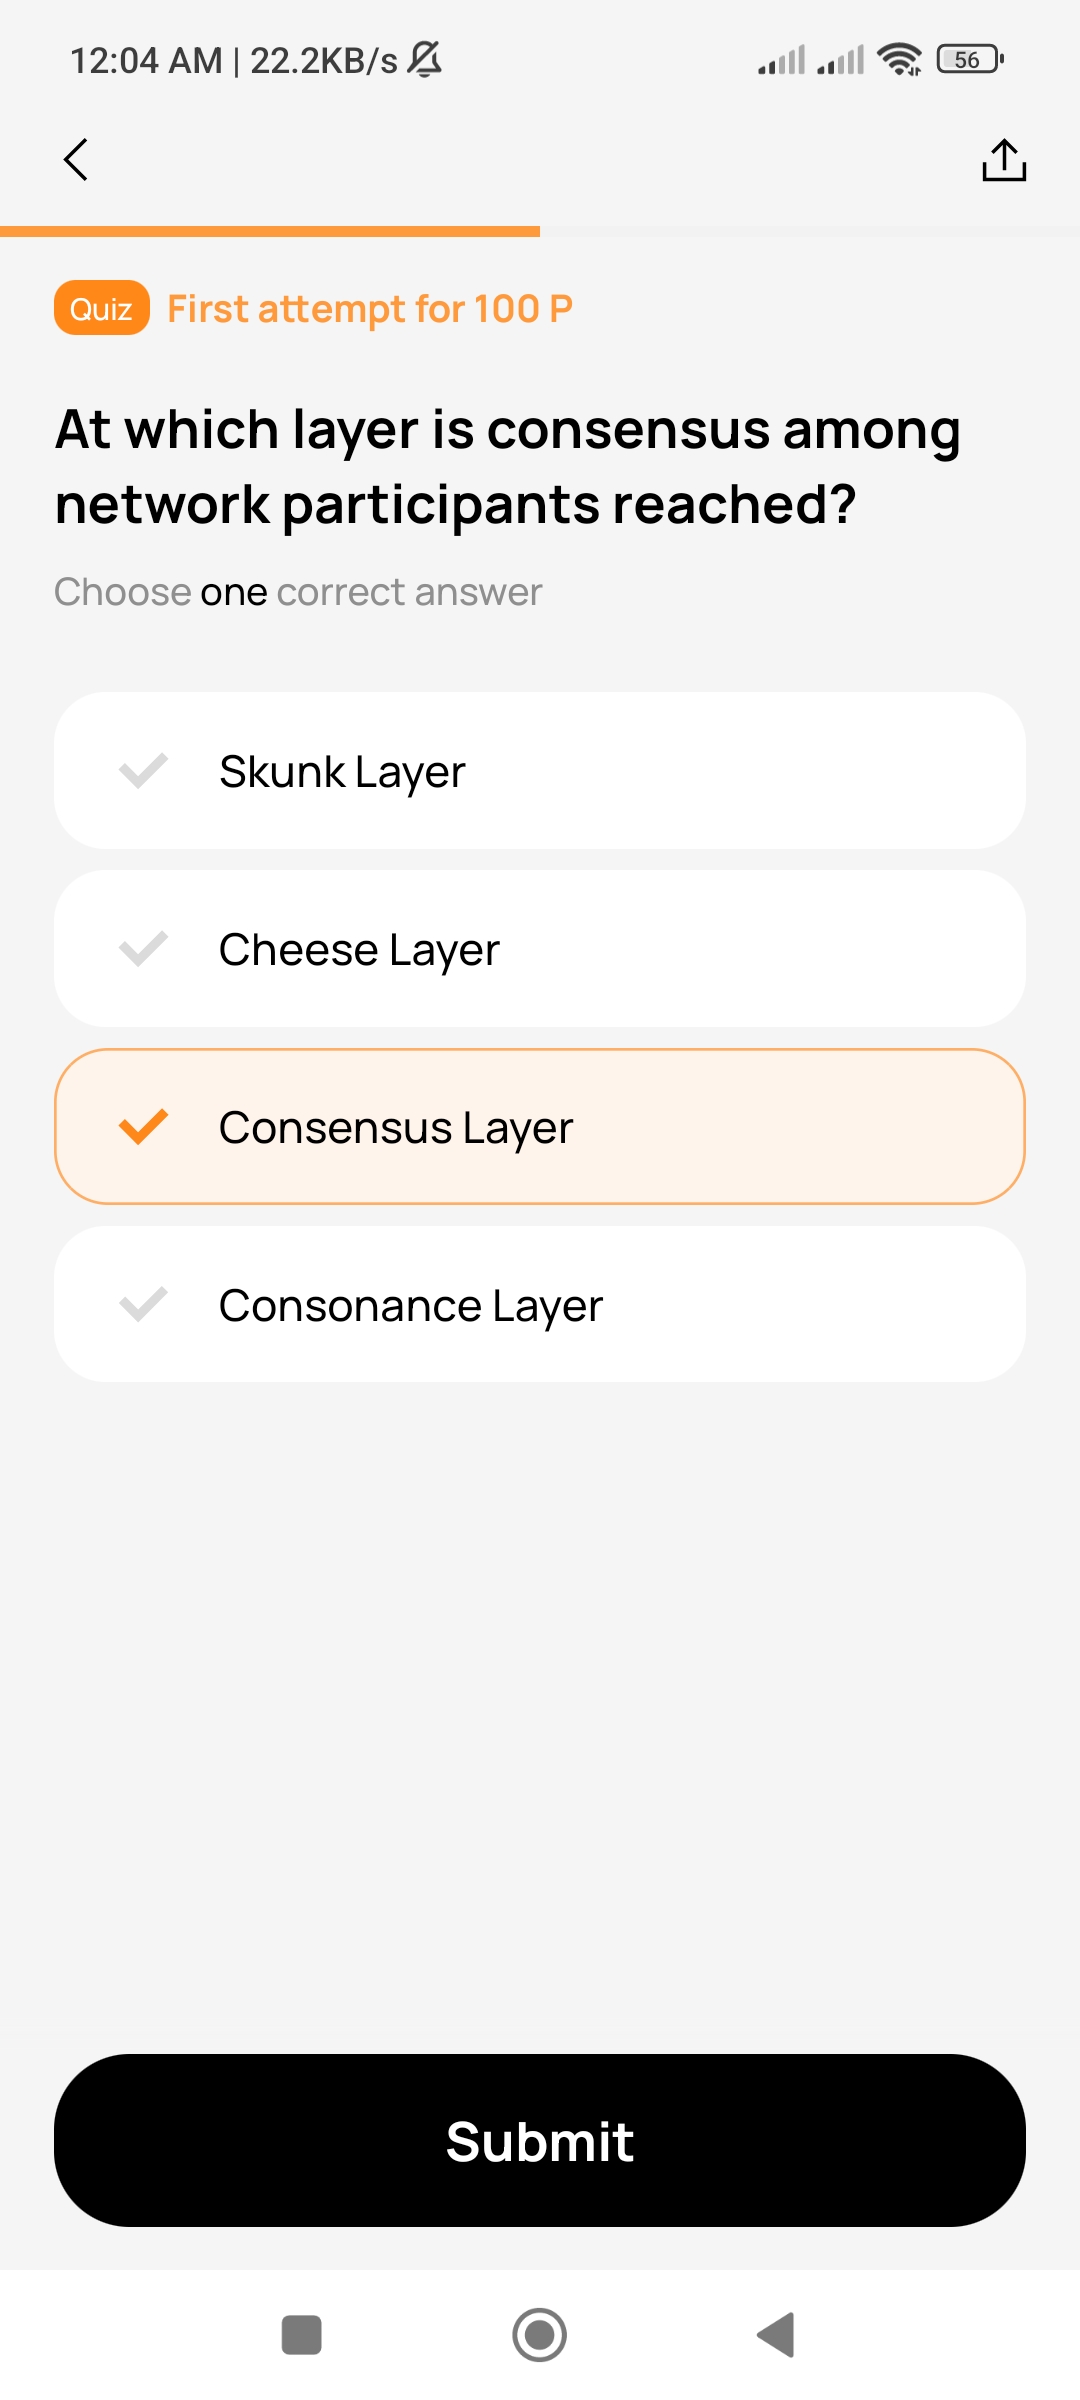 At which layer is consensus among network participants reached?